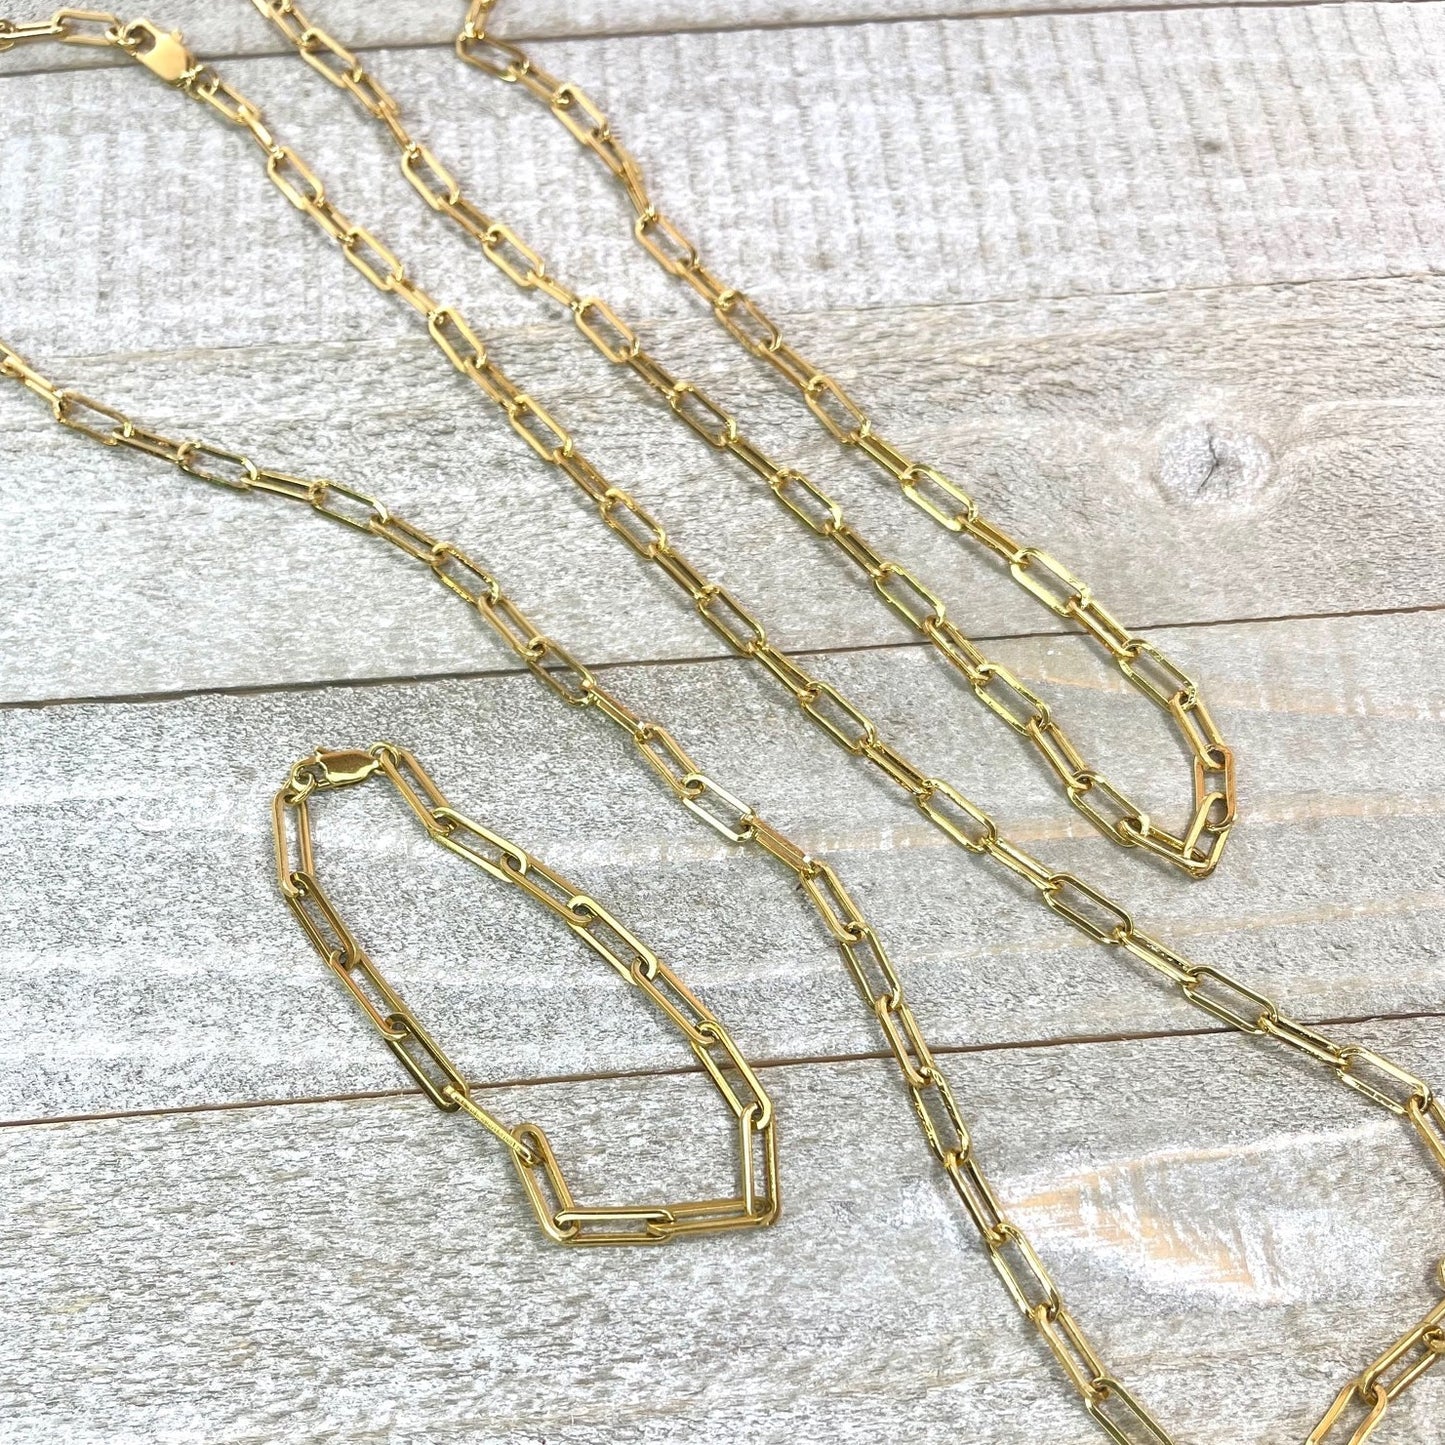 18" Gold Plated Paperclip Chain Necklace - Stylish & Versatile